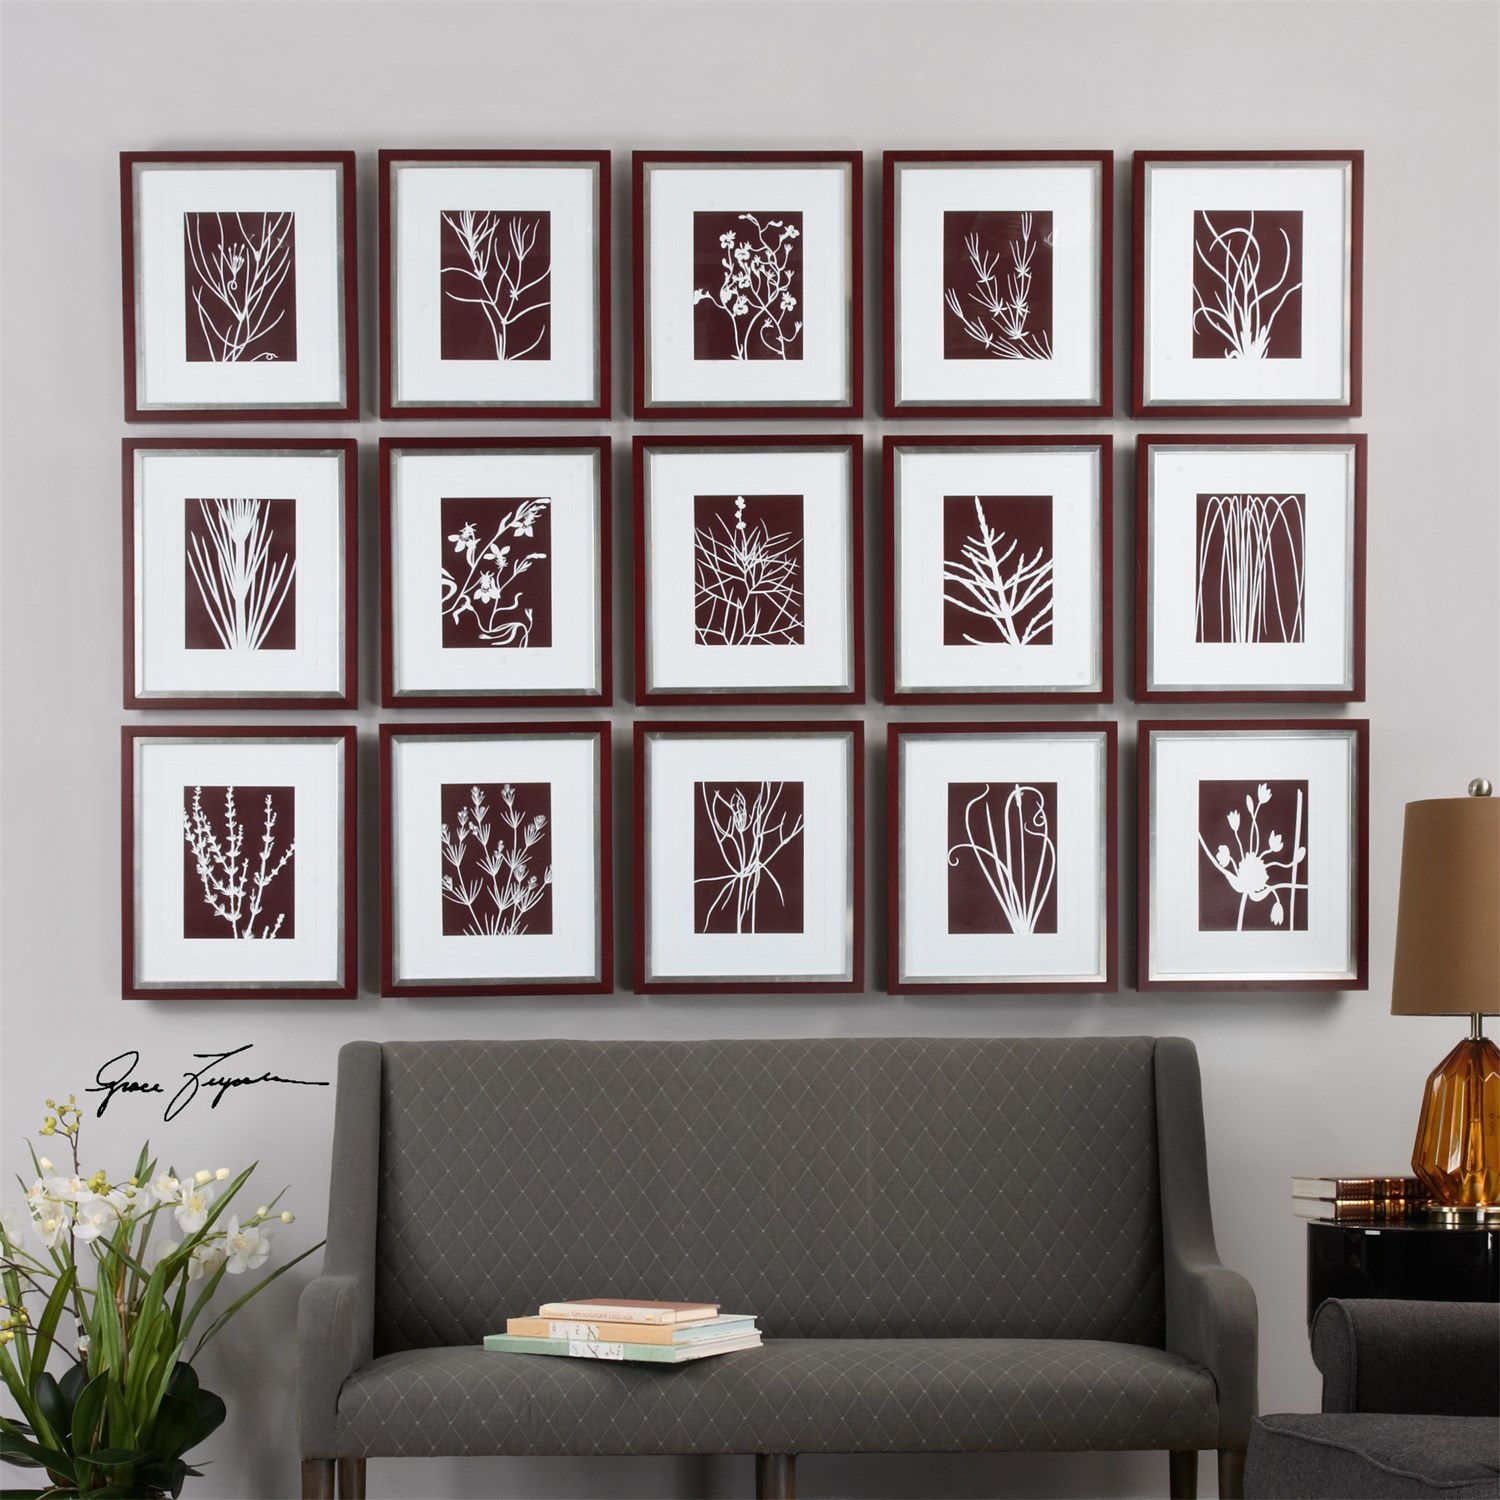 Item of the week: Uttermost Abstract Marsala Prints